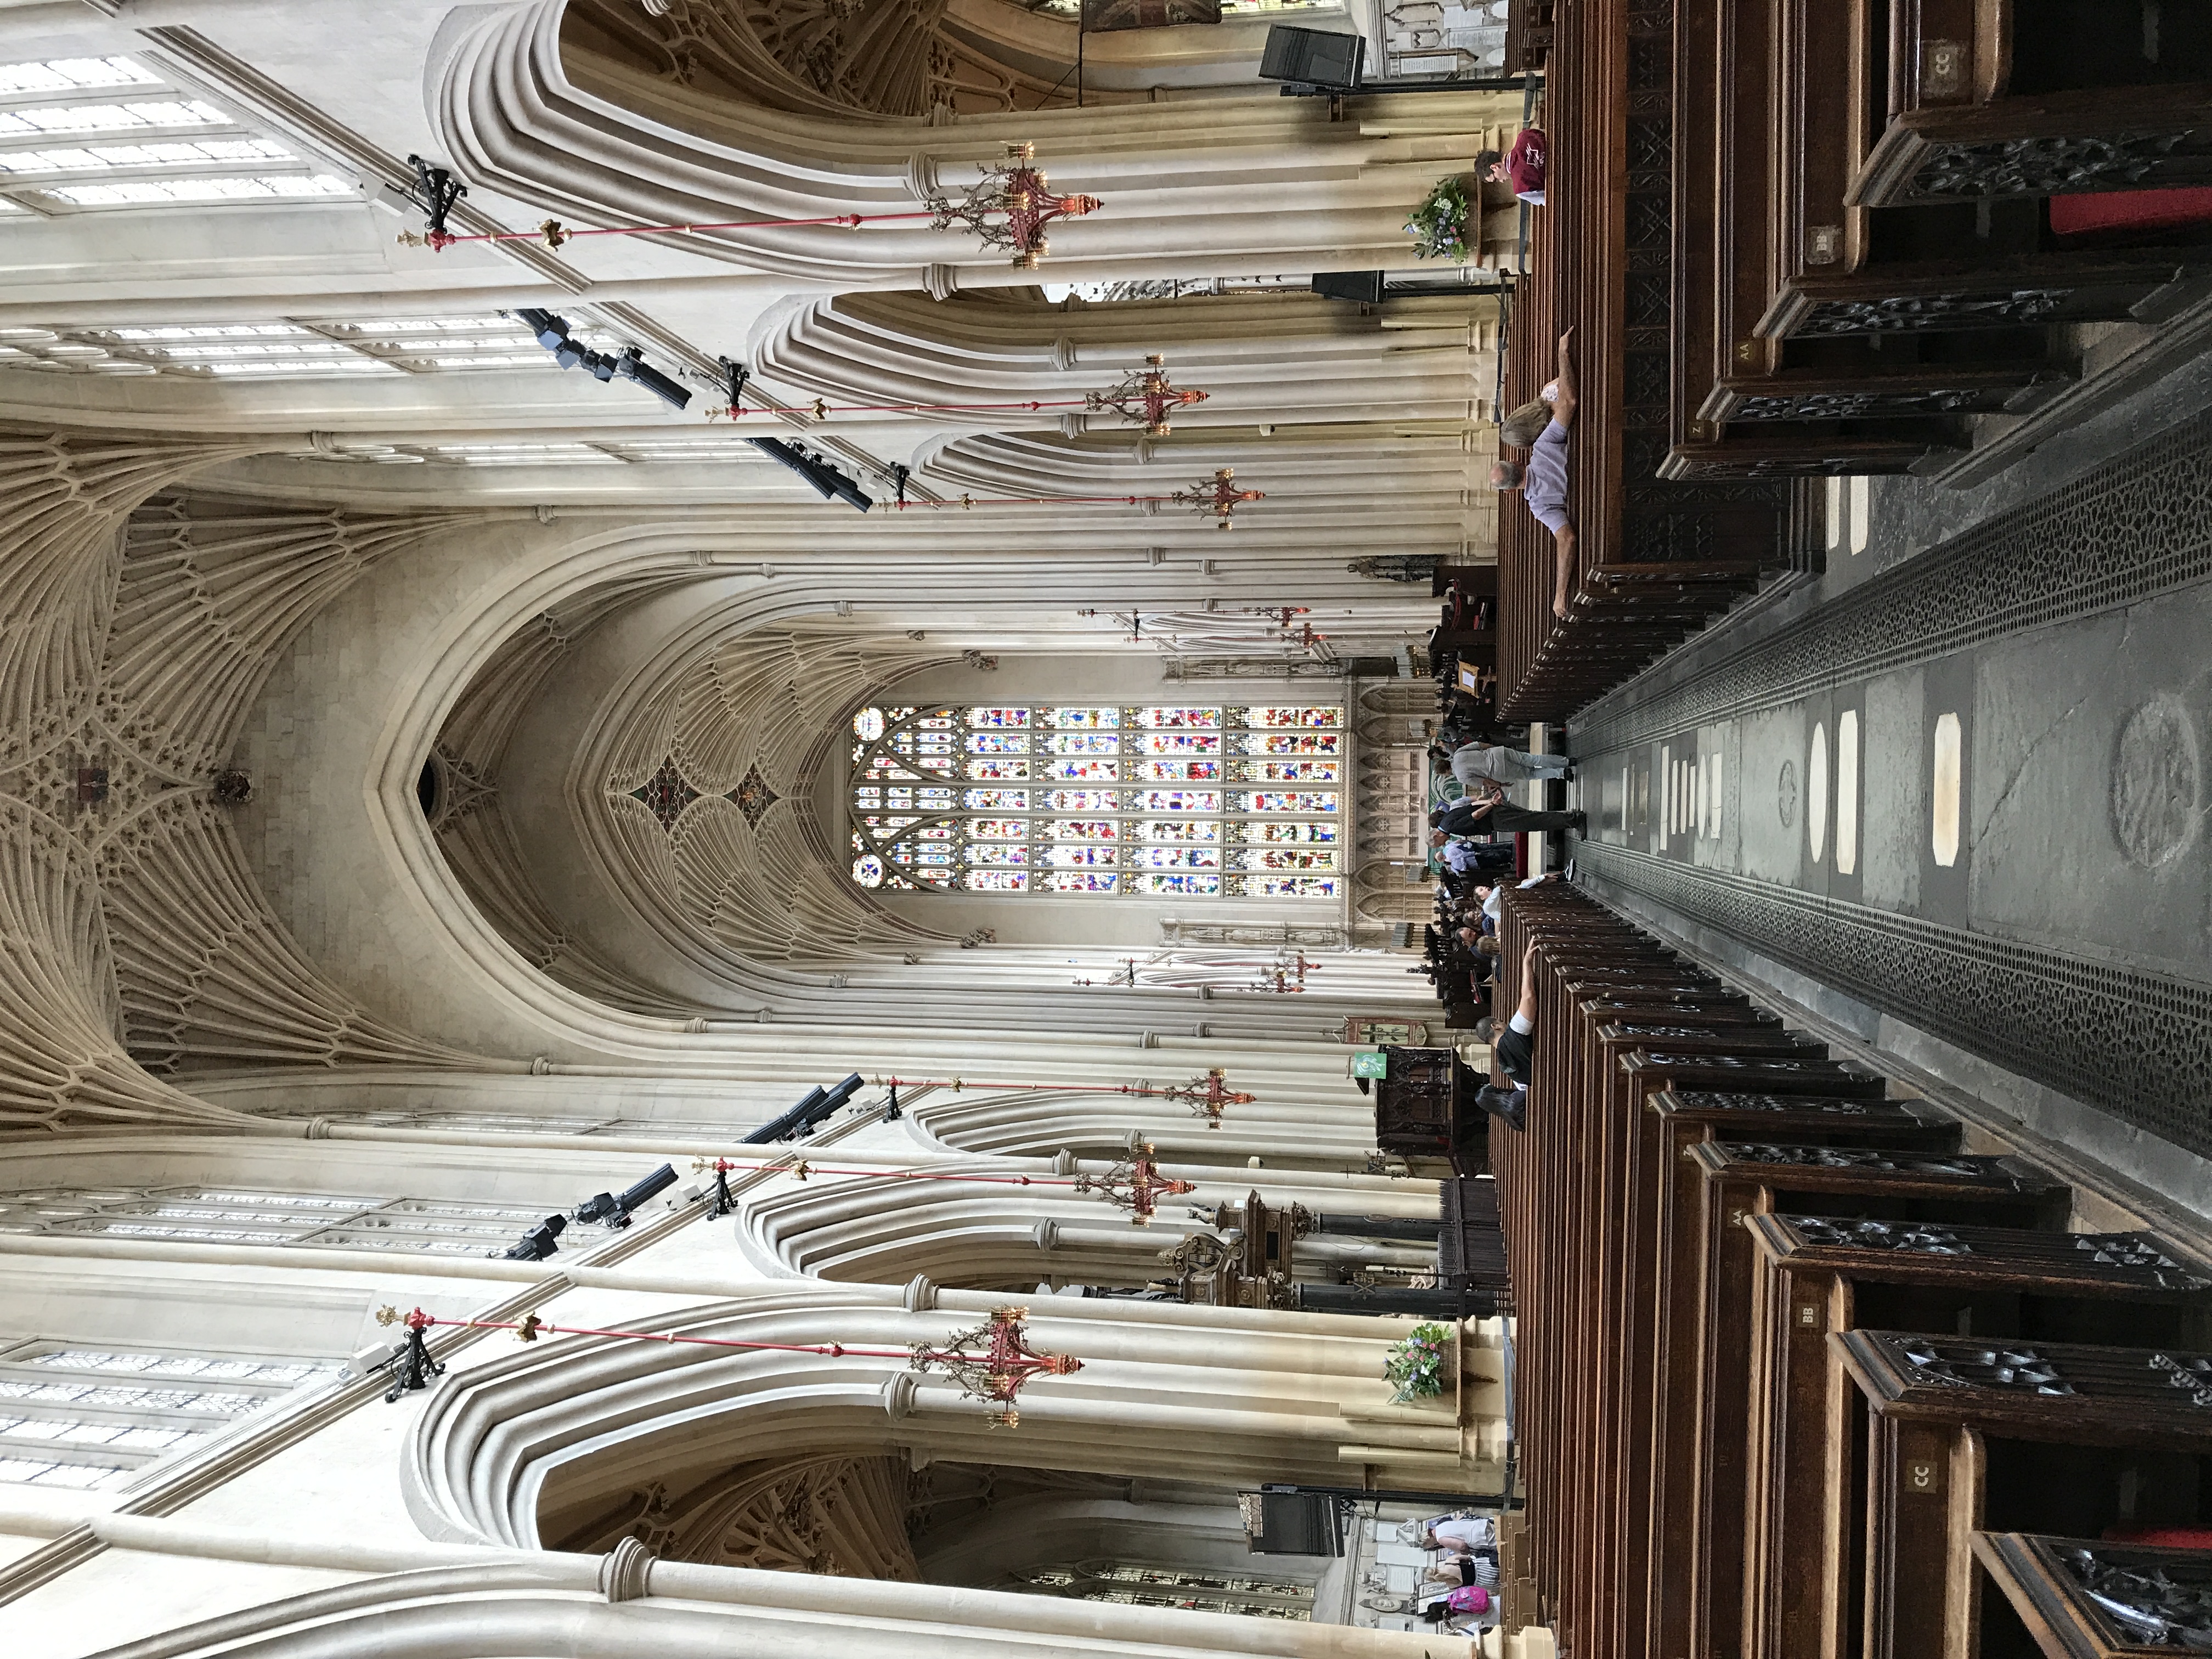 The nave at Bath Abbey, looking east toward the East Window